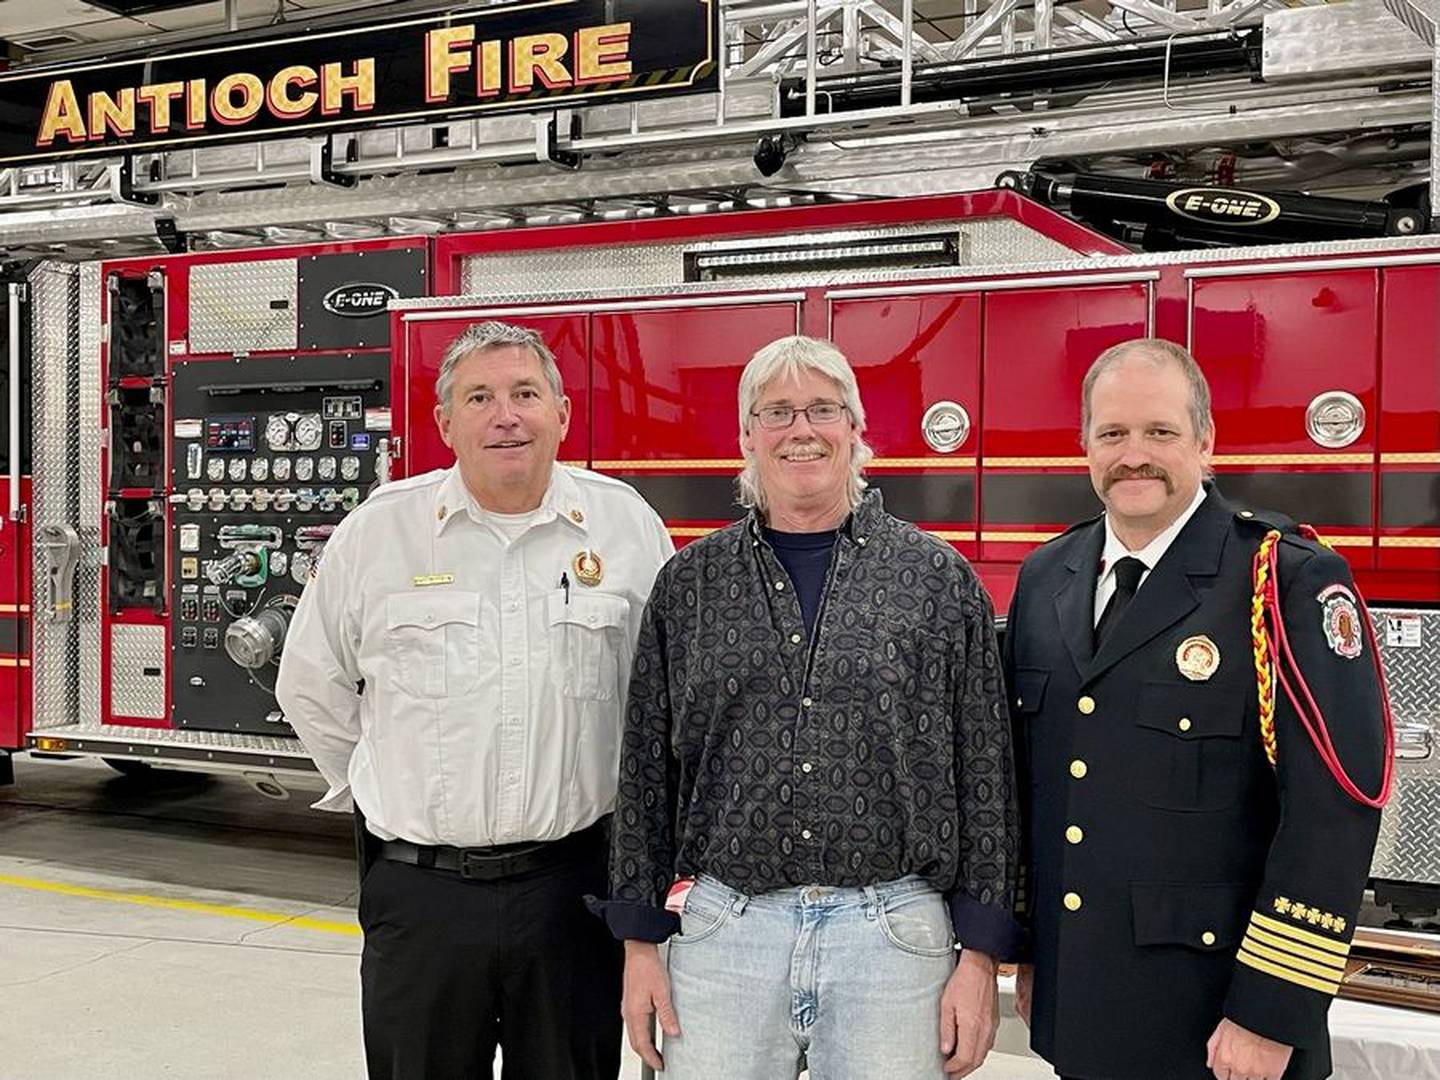 Retired Antioch firefighter Jeff VanPatten, center, was honored recently for 35 years of service. He's flanked by Chief Jon Cokefair, left, and Deputy Chief Jim Cook. VanPatten was the fourth generation of his family to serve in the department.